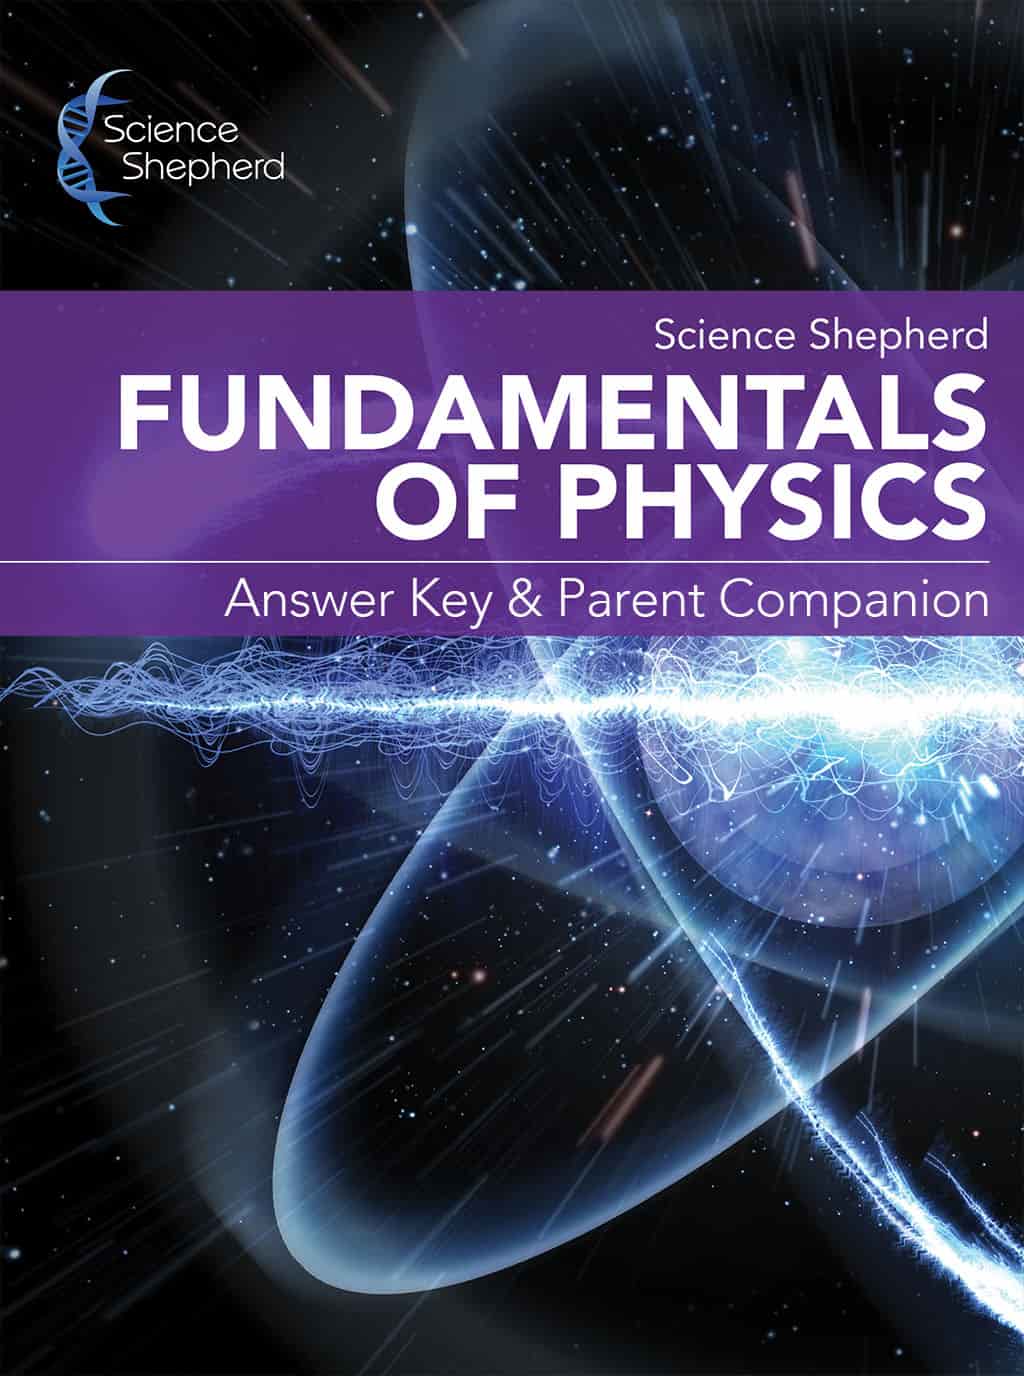 Fundamentals of Physics homeschool videos answer key and parent companion cover